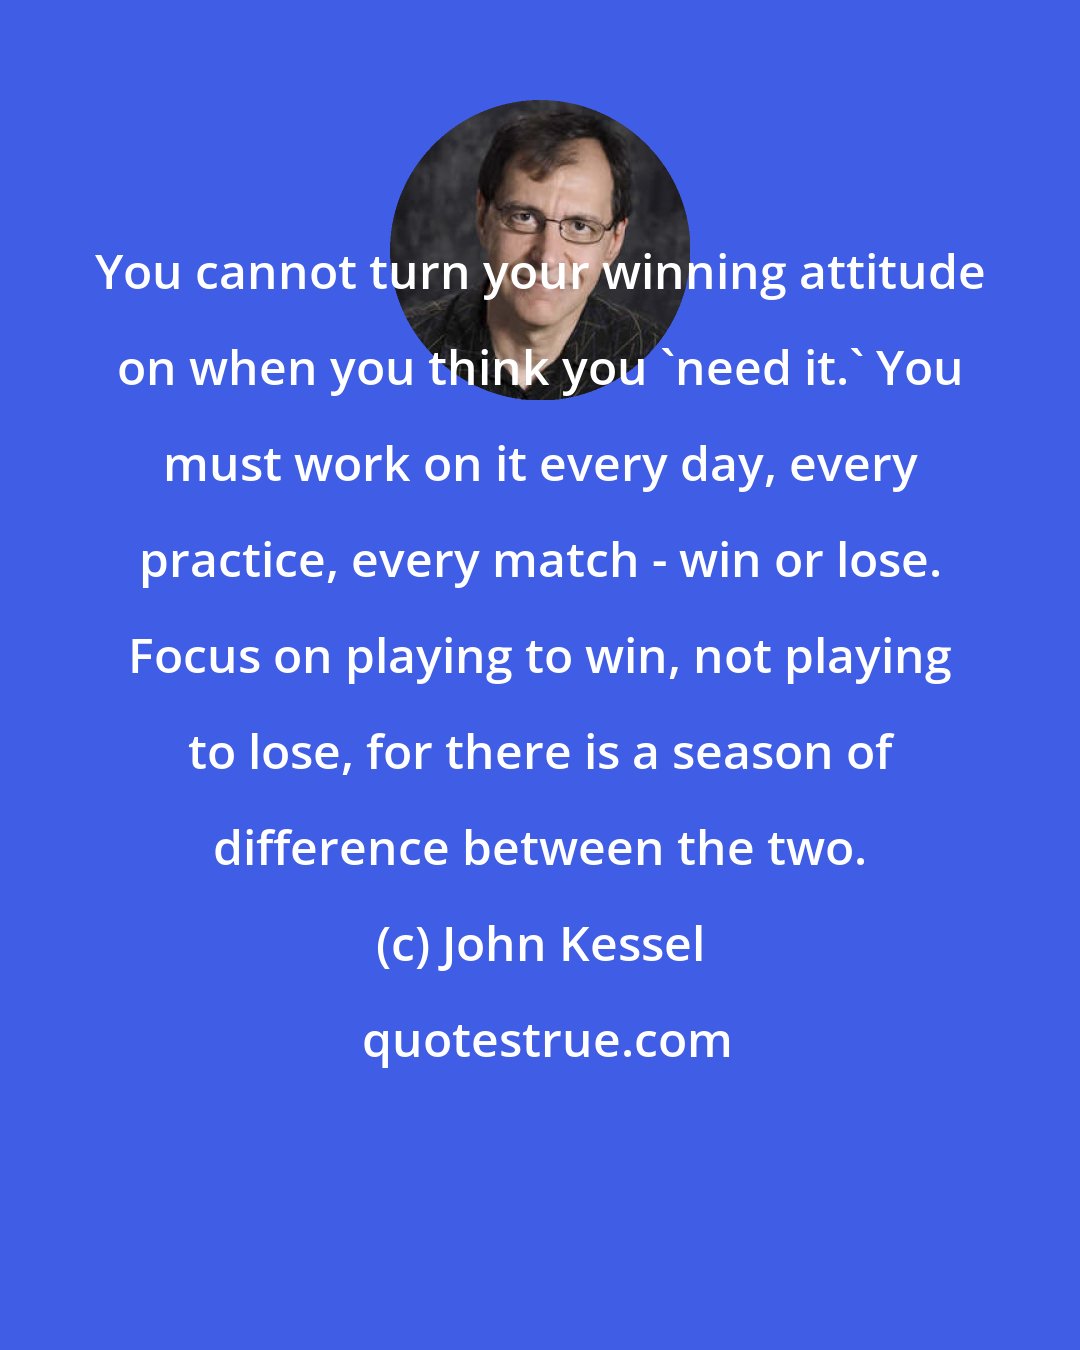 John Kessel: You cannot turn your winning attitude on when you think you 'need it.' You must work on it every day, every practice, every match - win or lose. Focus on playing to win, not playing to lose, for there is a season of difference between the two.